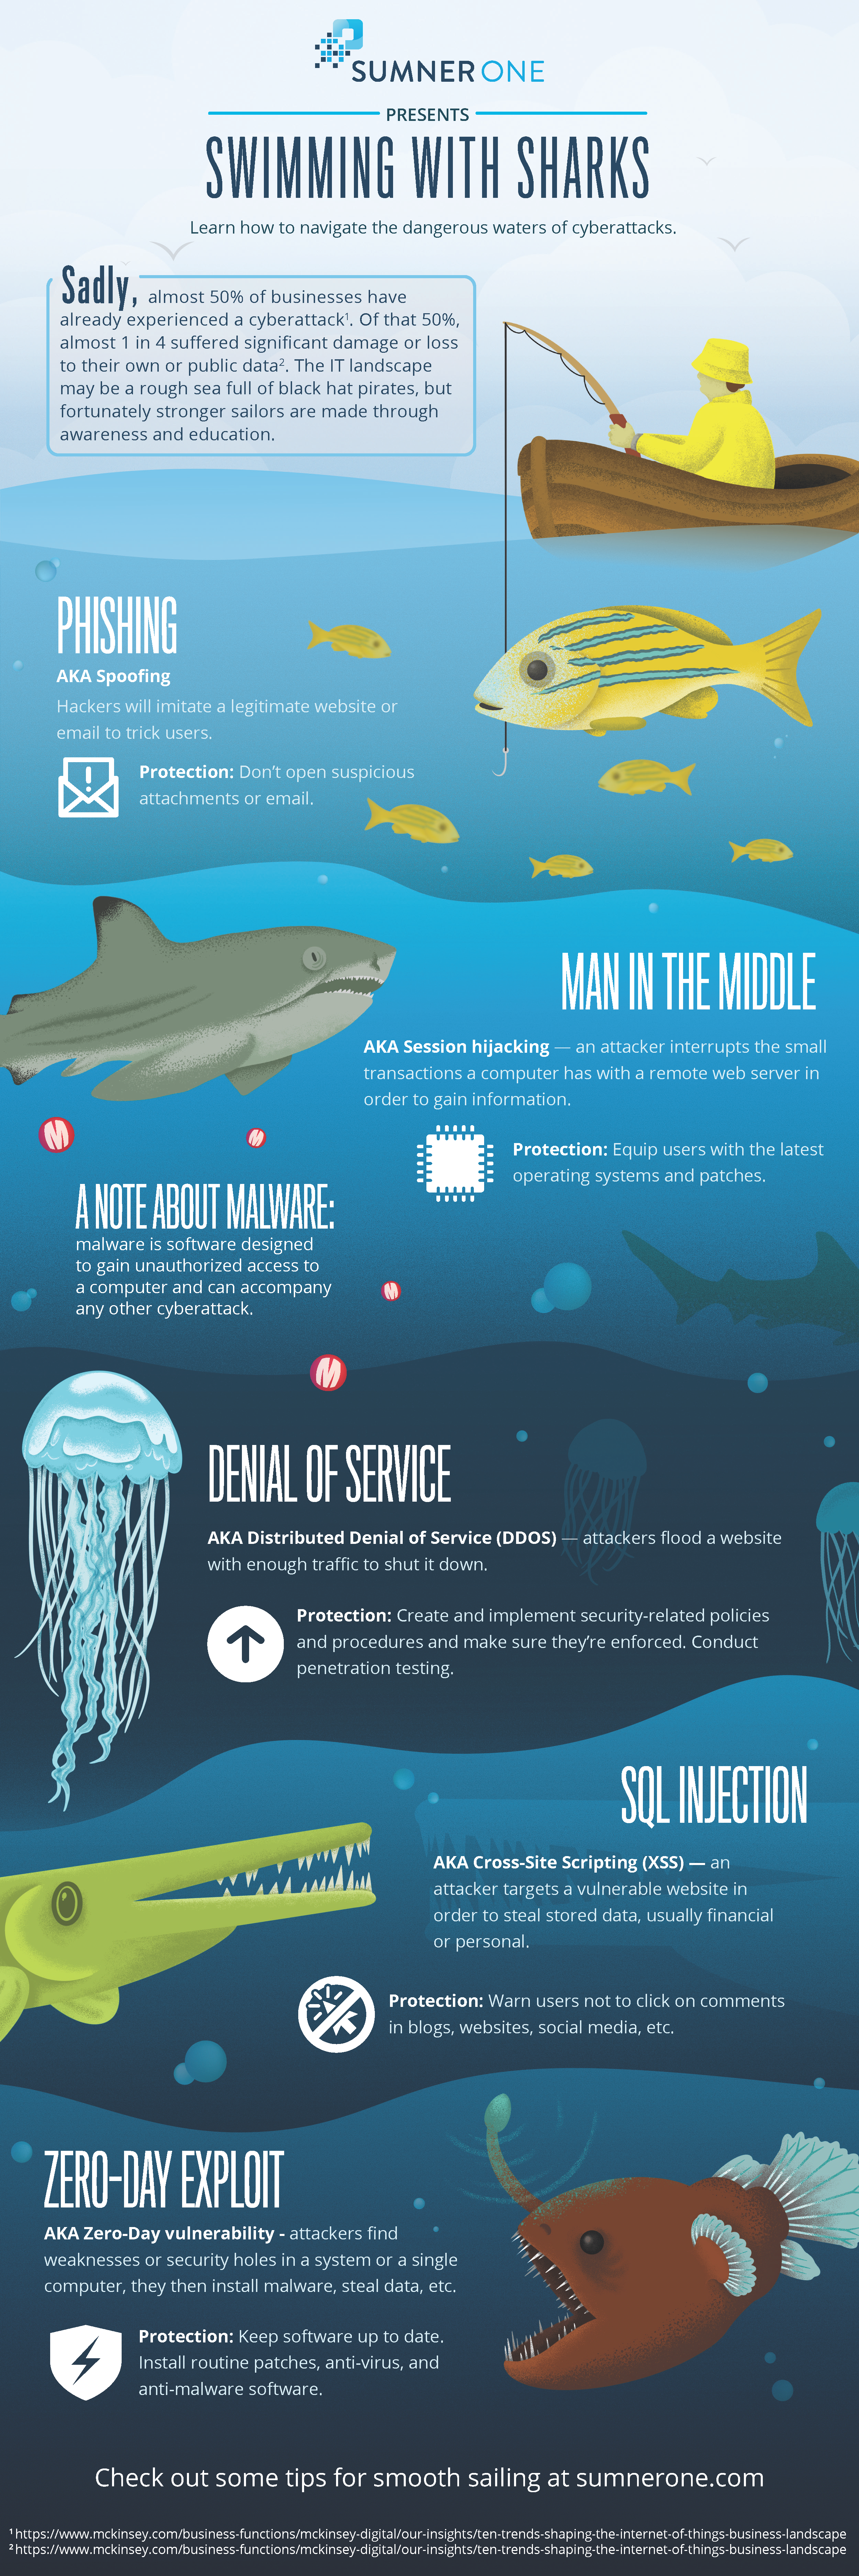 Swimming-With-Sharks_SumnerOne-Infographic